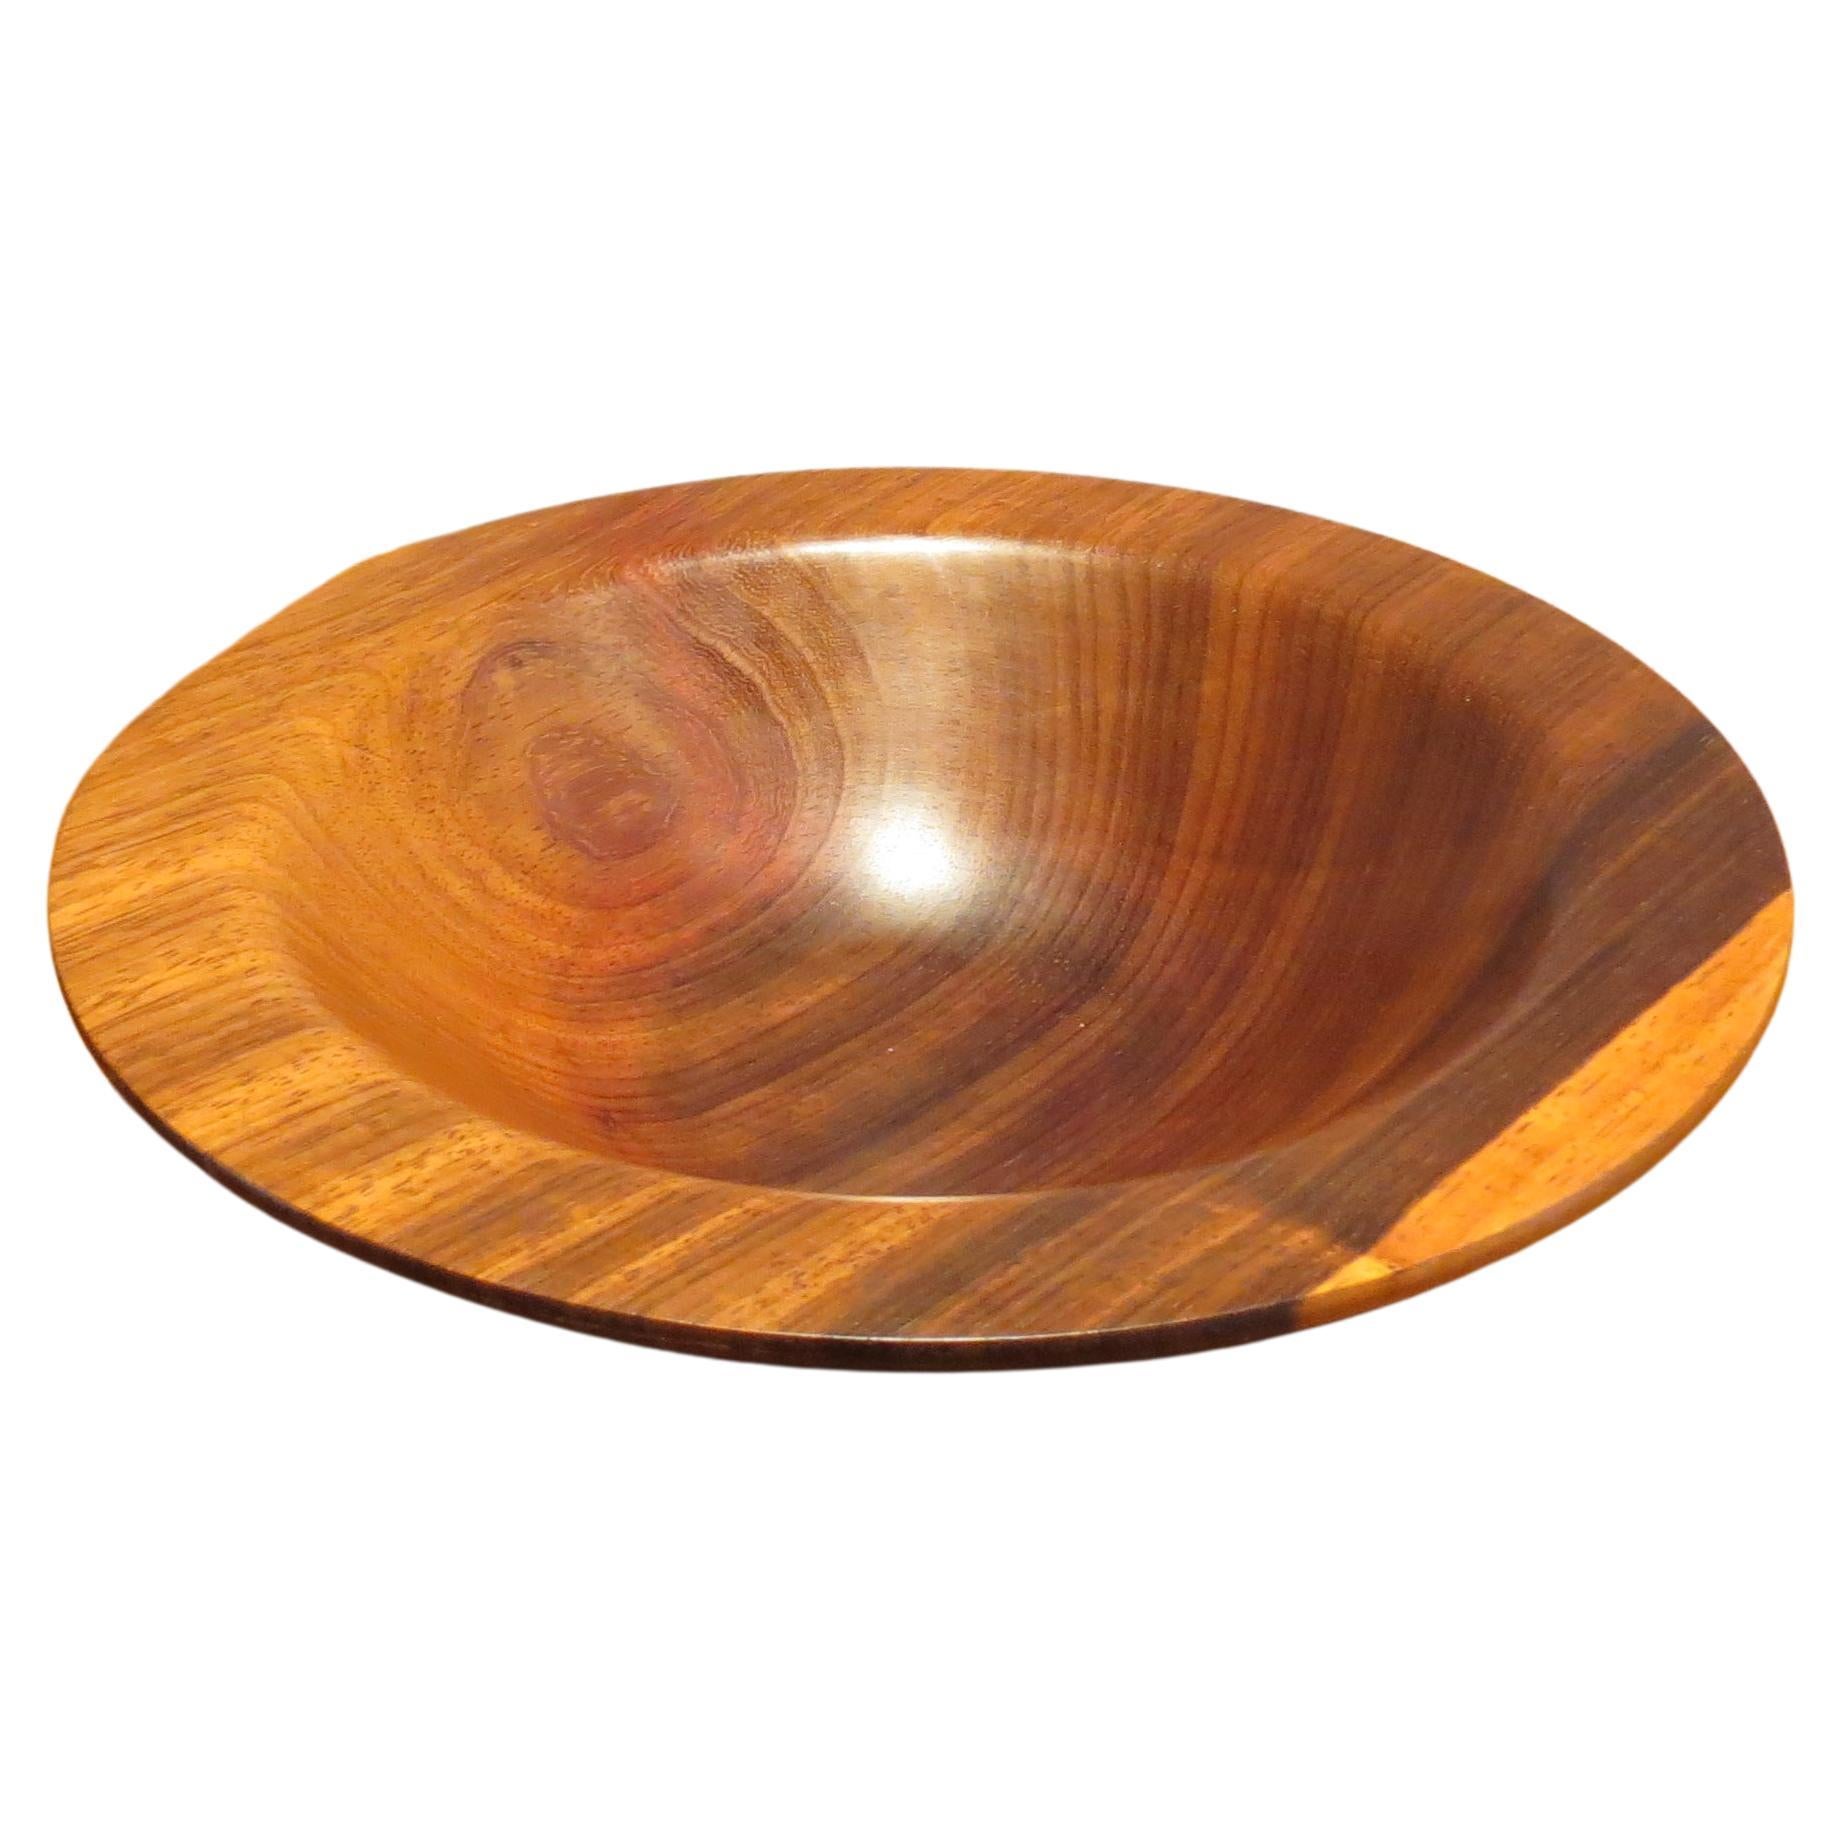 Vintage Hand Turned Padauk Wooden Bowl For Sale